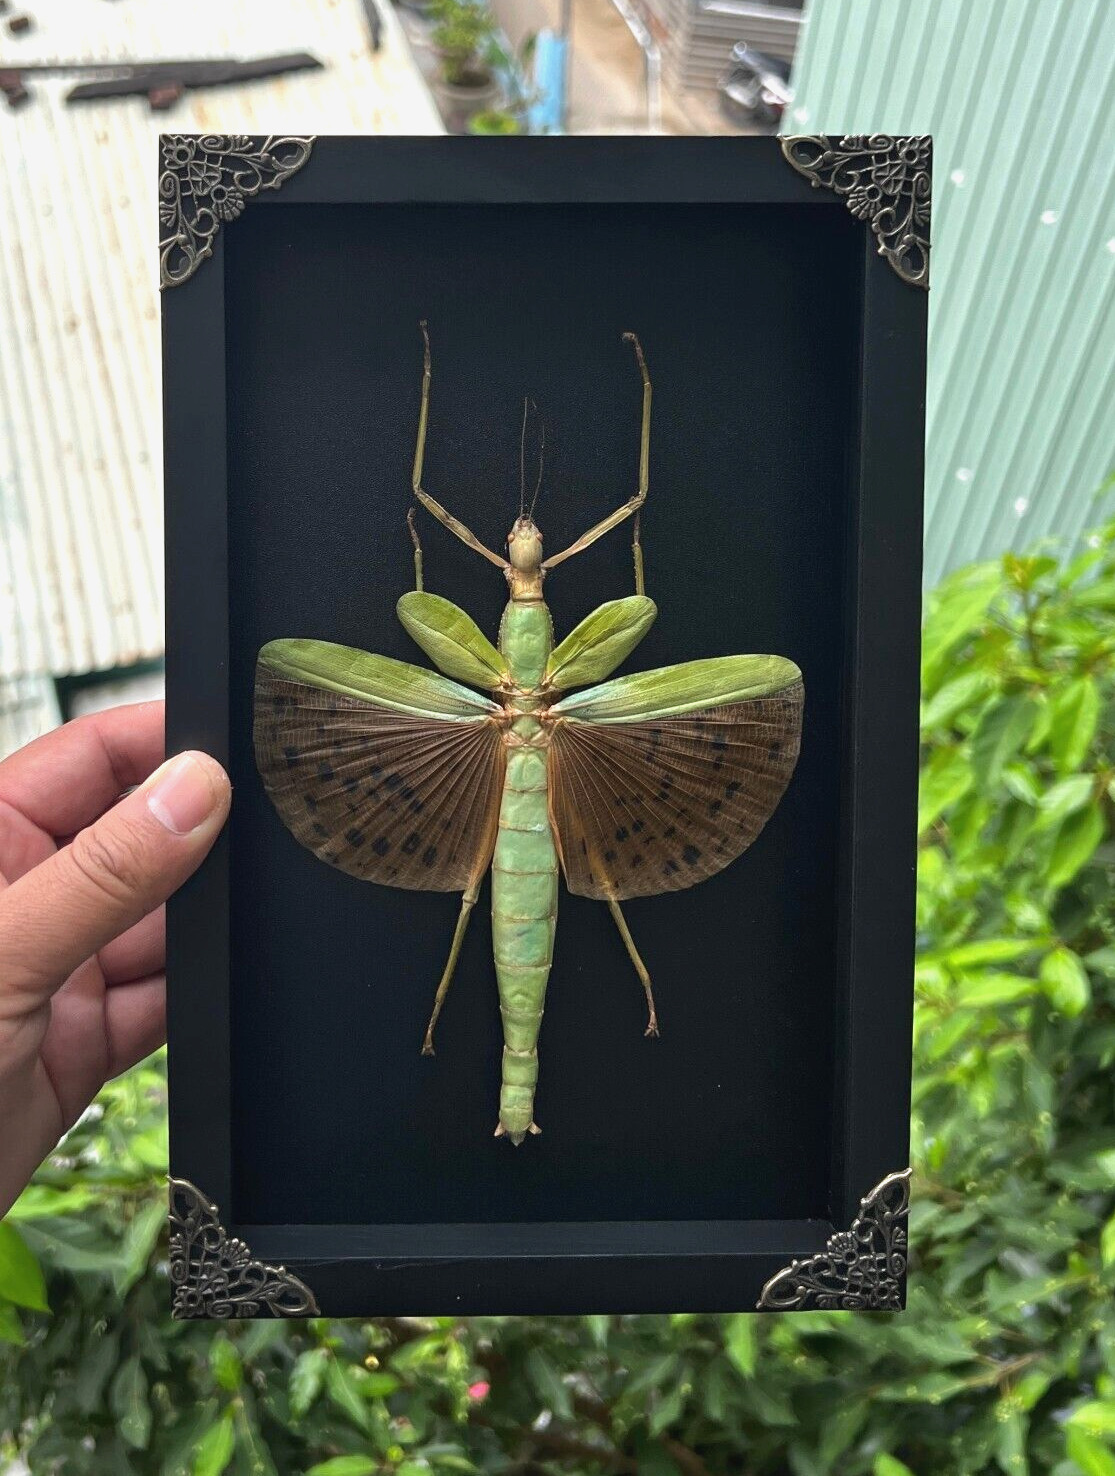 Taxidermy Giant Walking Beetle Framed Real Insect Specimen Entomology Gift